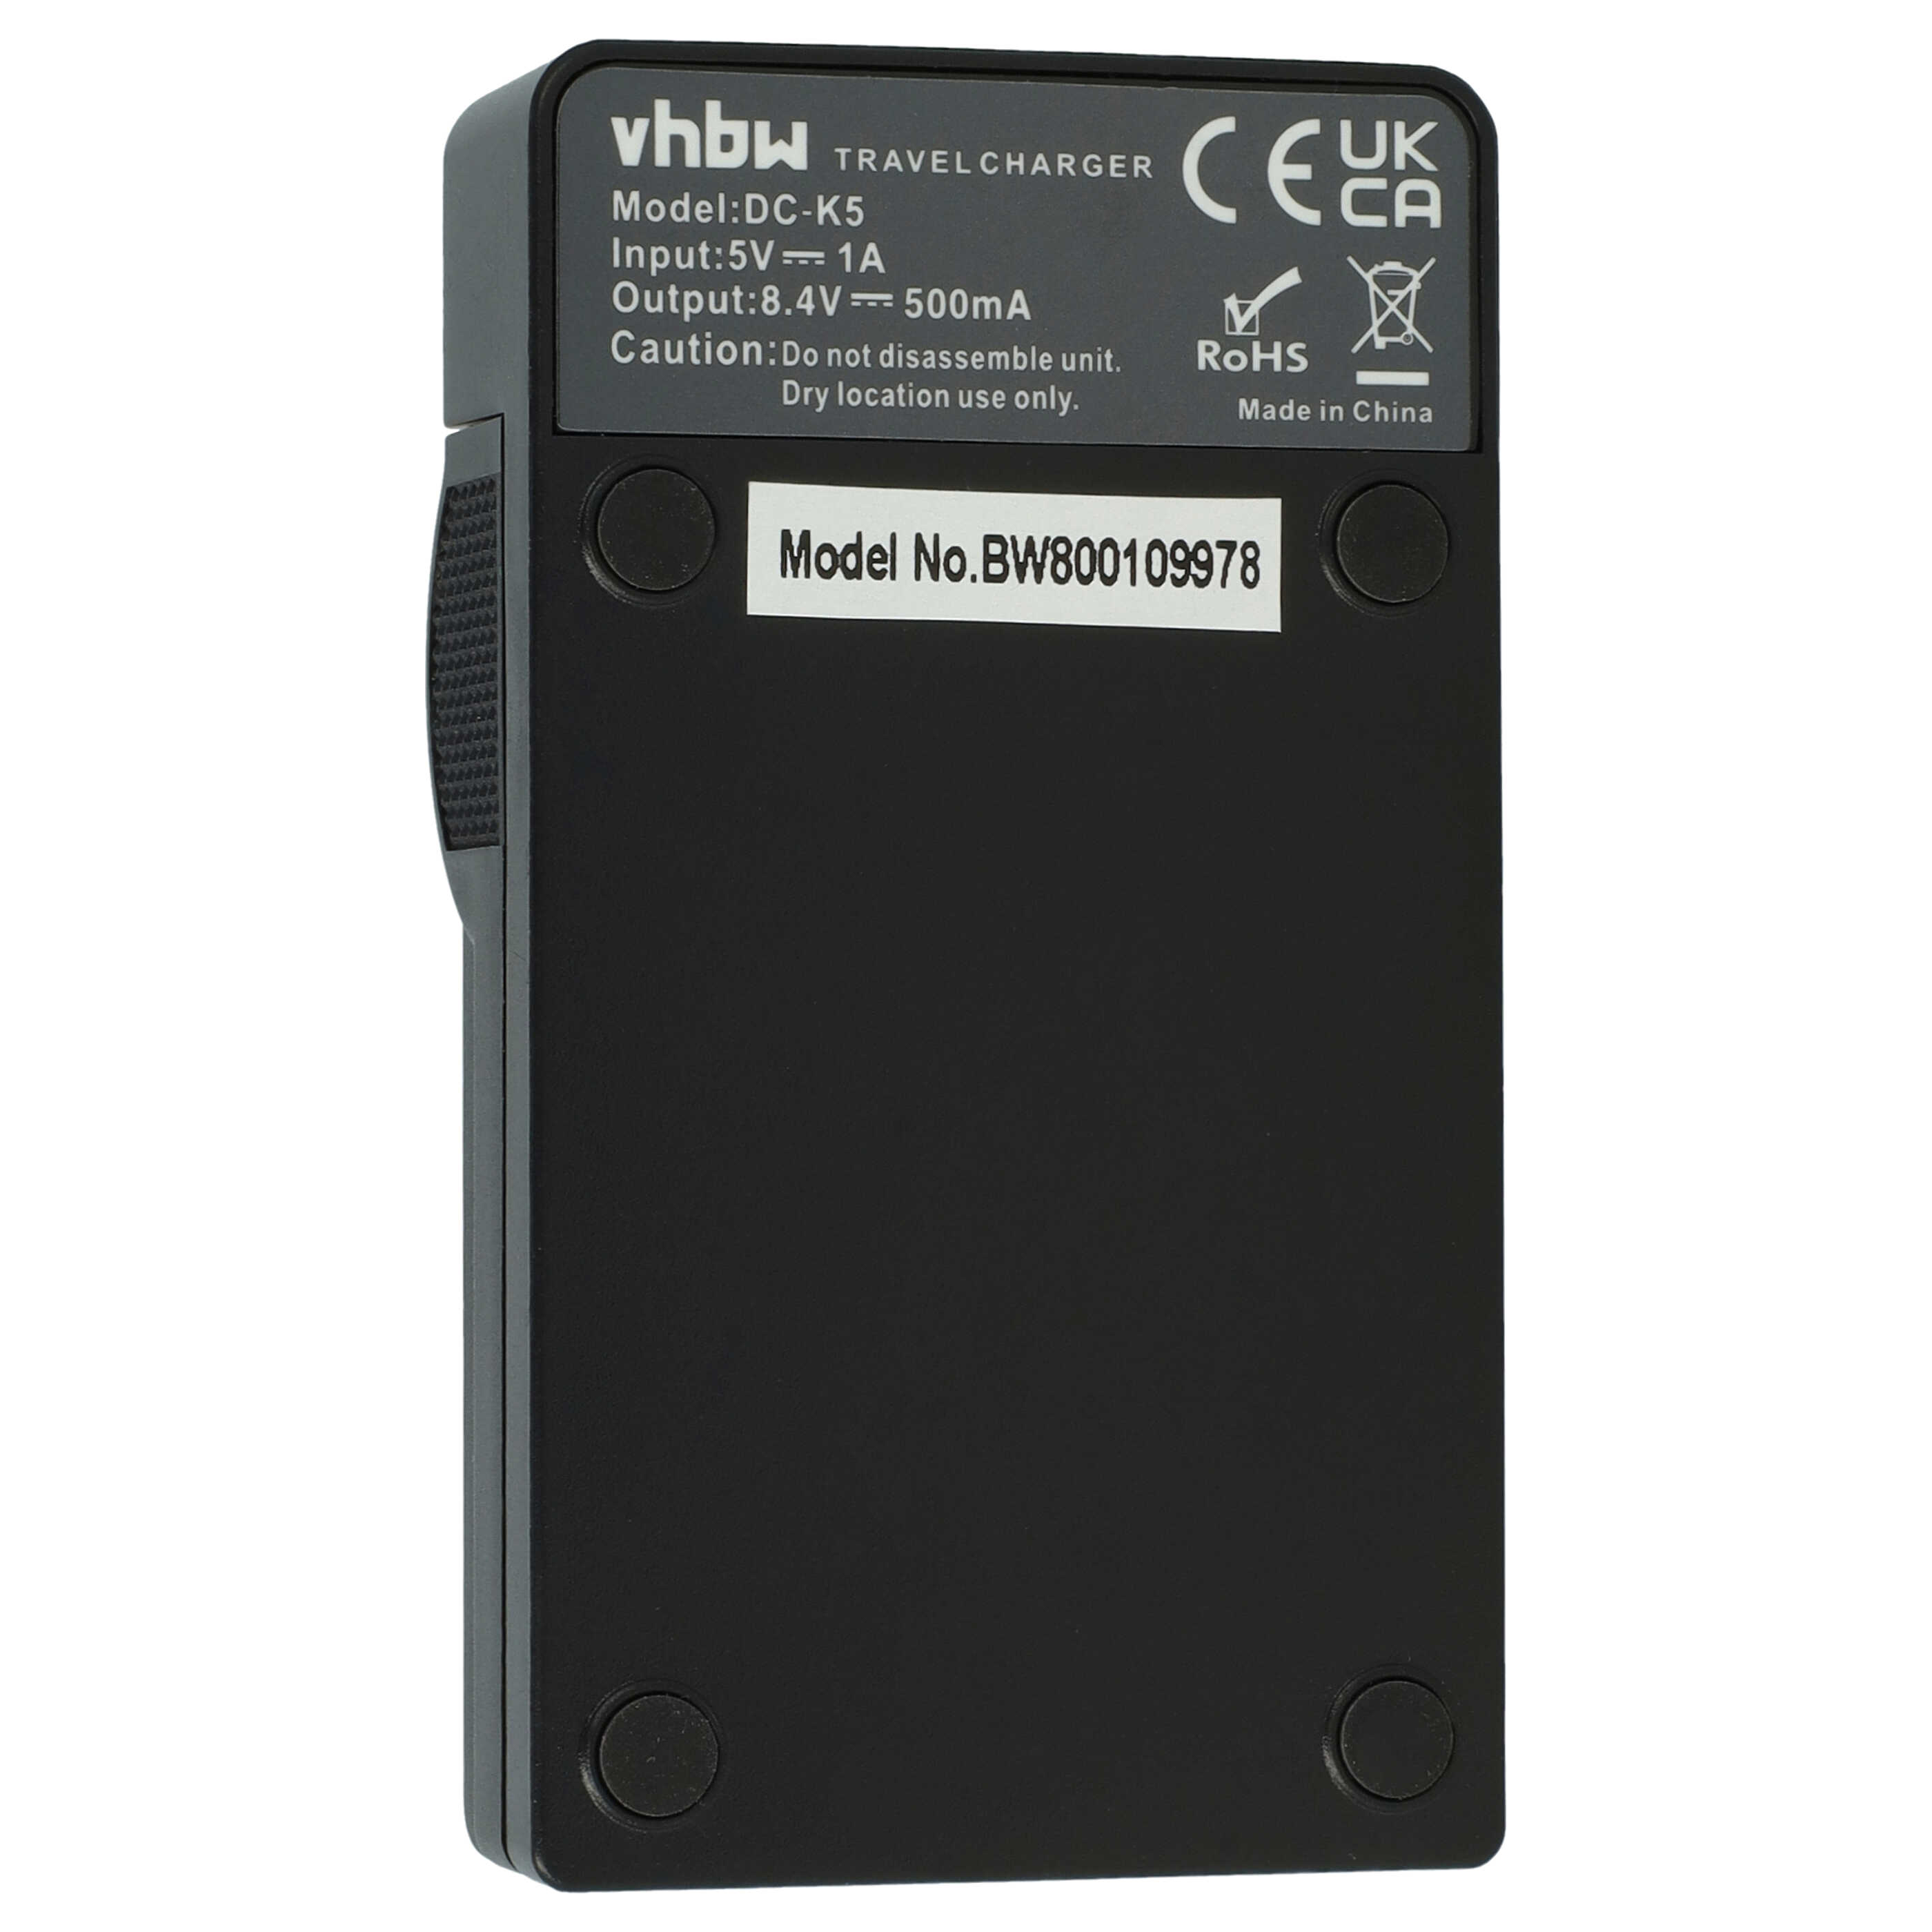 Battery Charger suitable for Canon LP-E12 Camera etc. - 0.5 A, 8.4 V